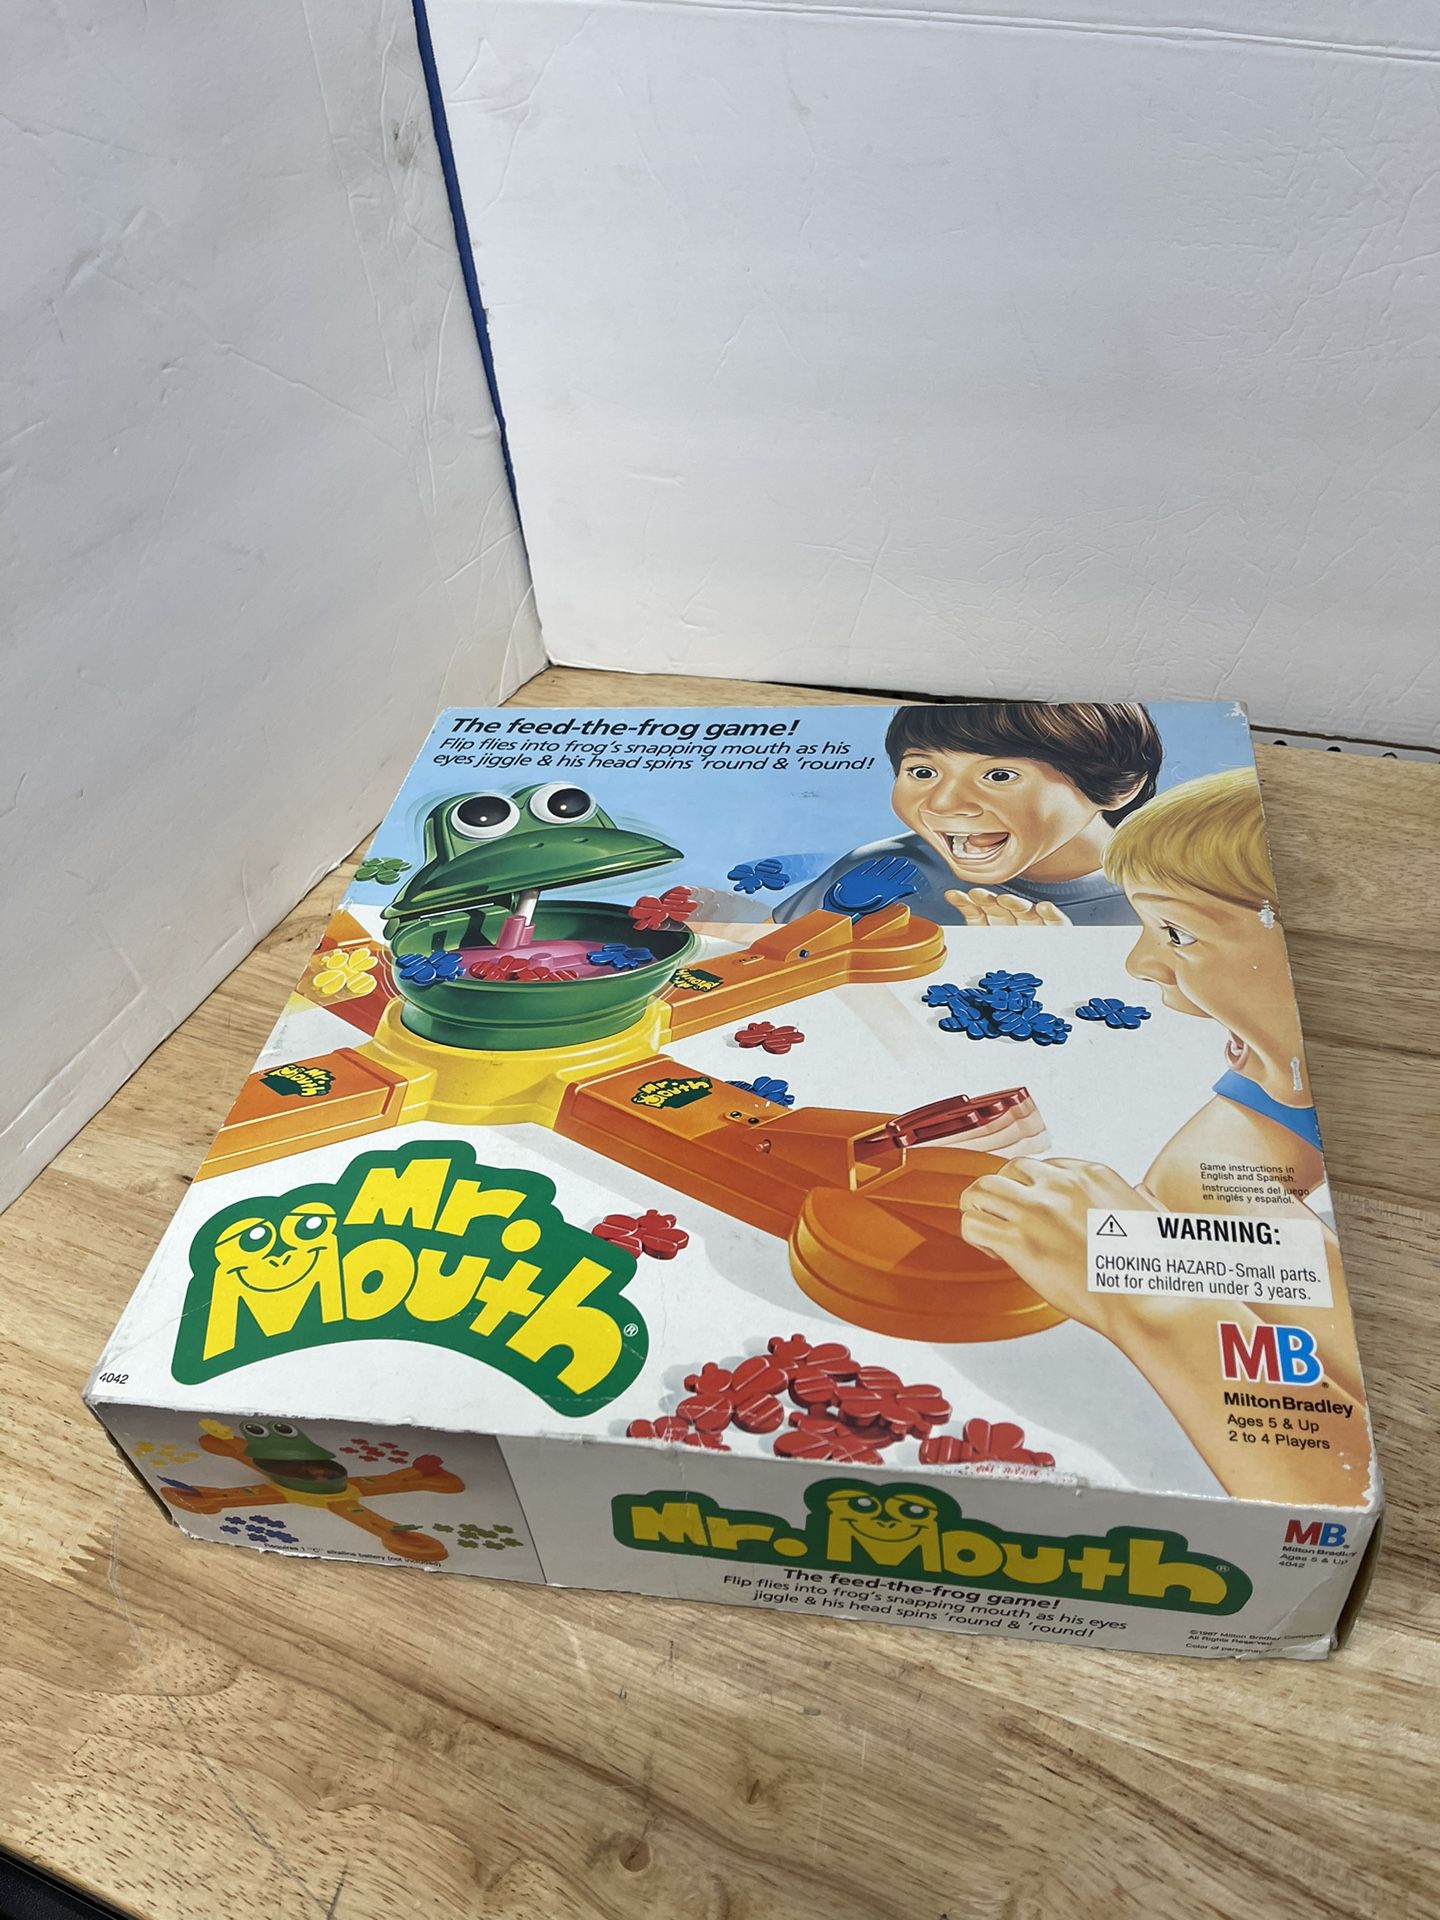 Mr. Mouth Motorized Child Skill Action Board Game Milton Bradley 1987